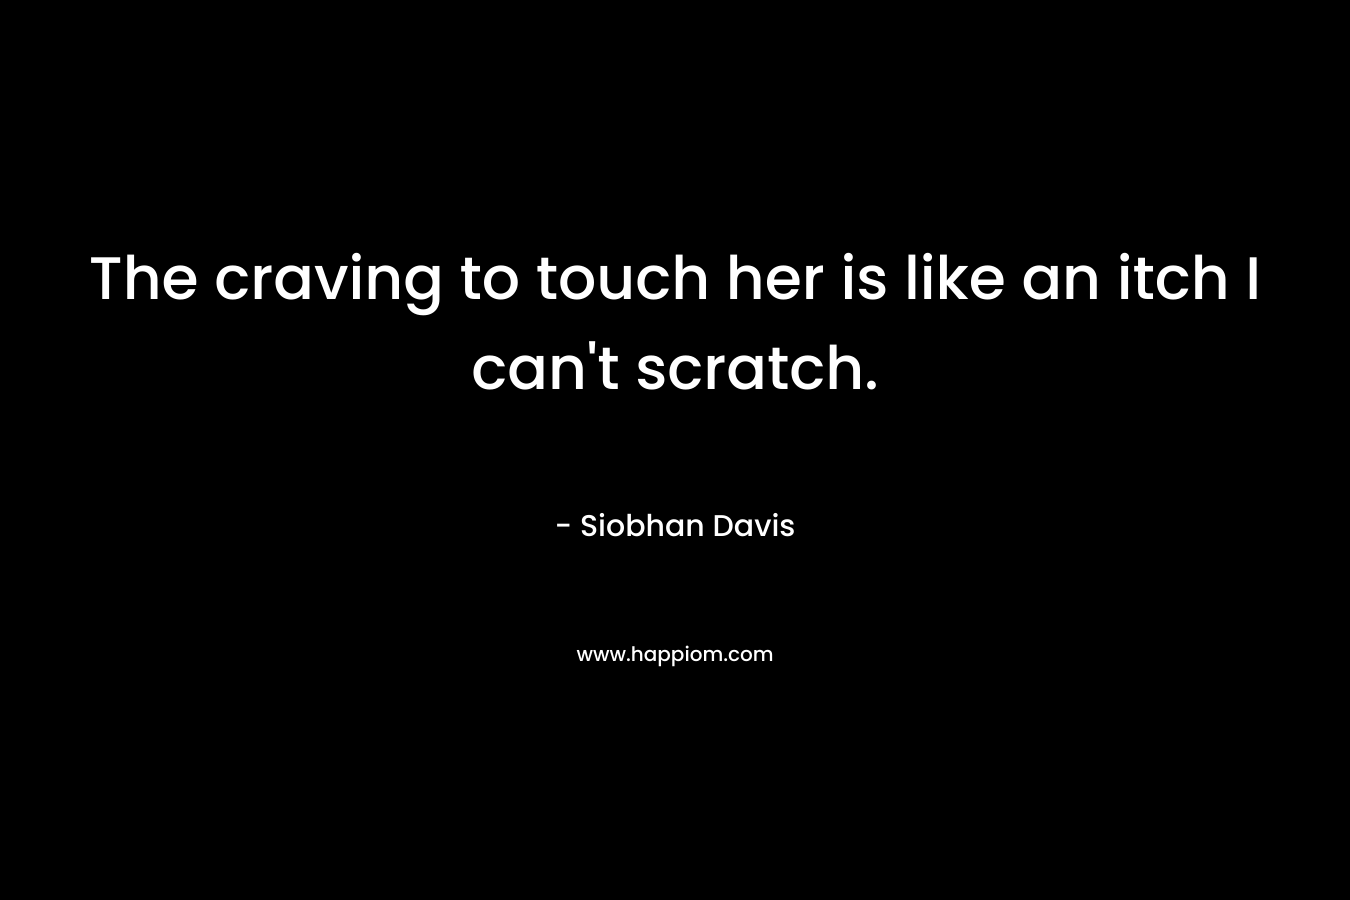 The craving to touch her is like an itch I can't scratch.